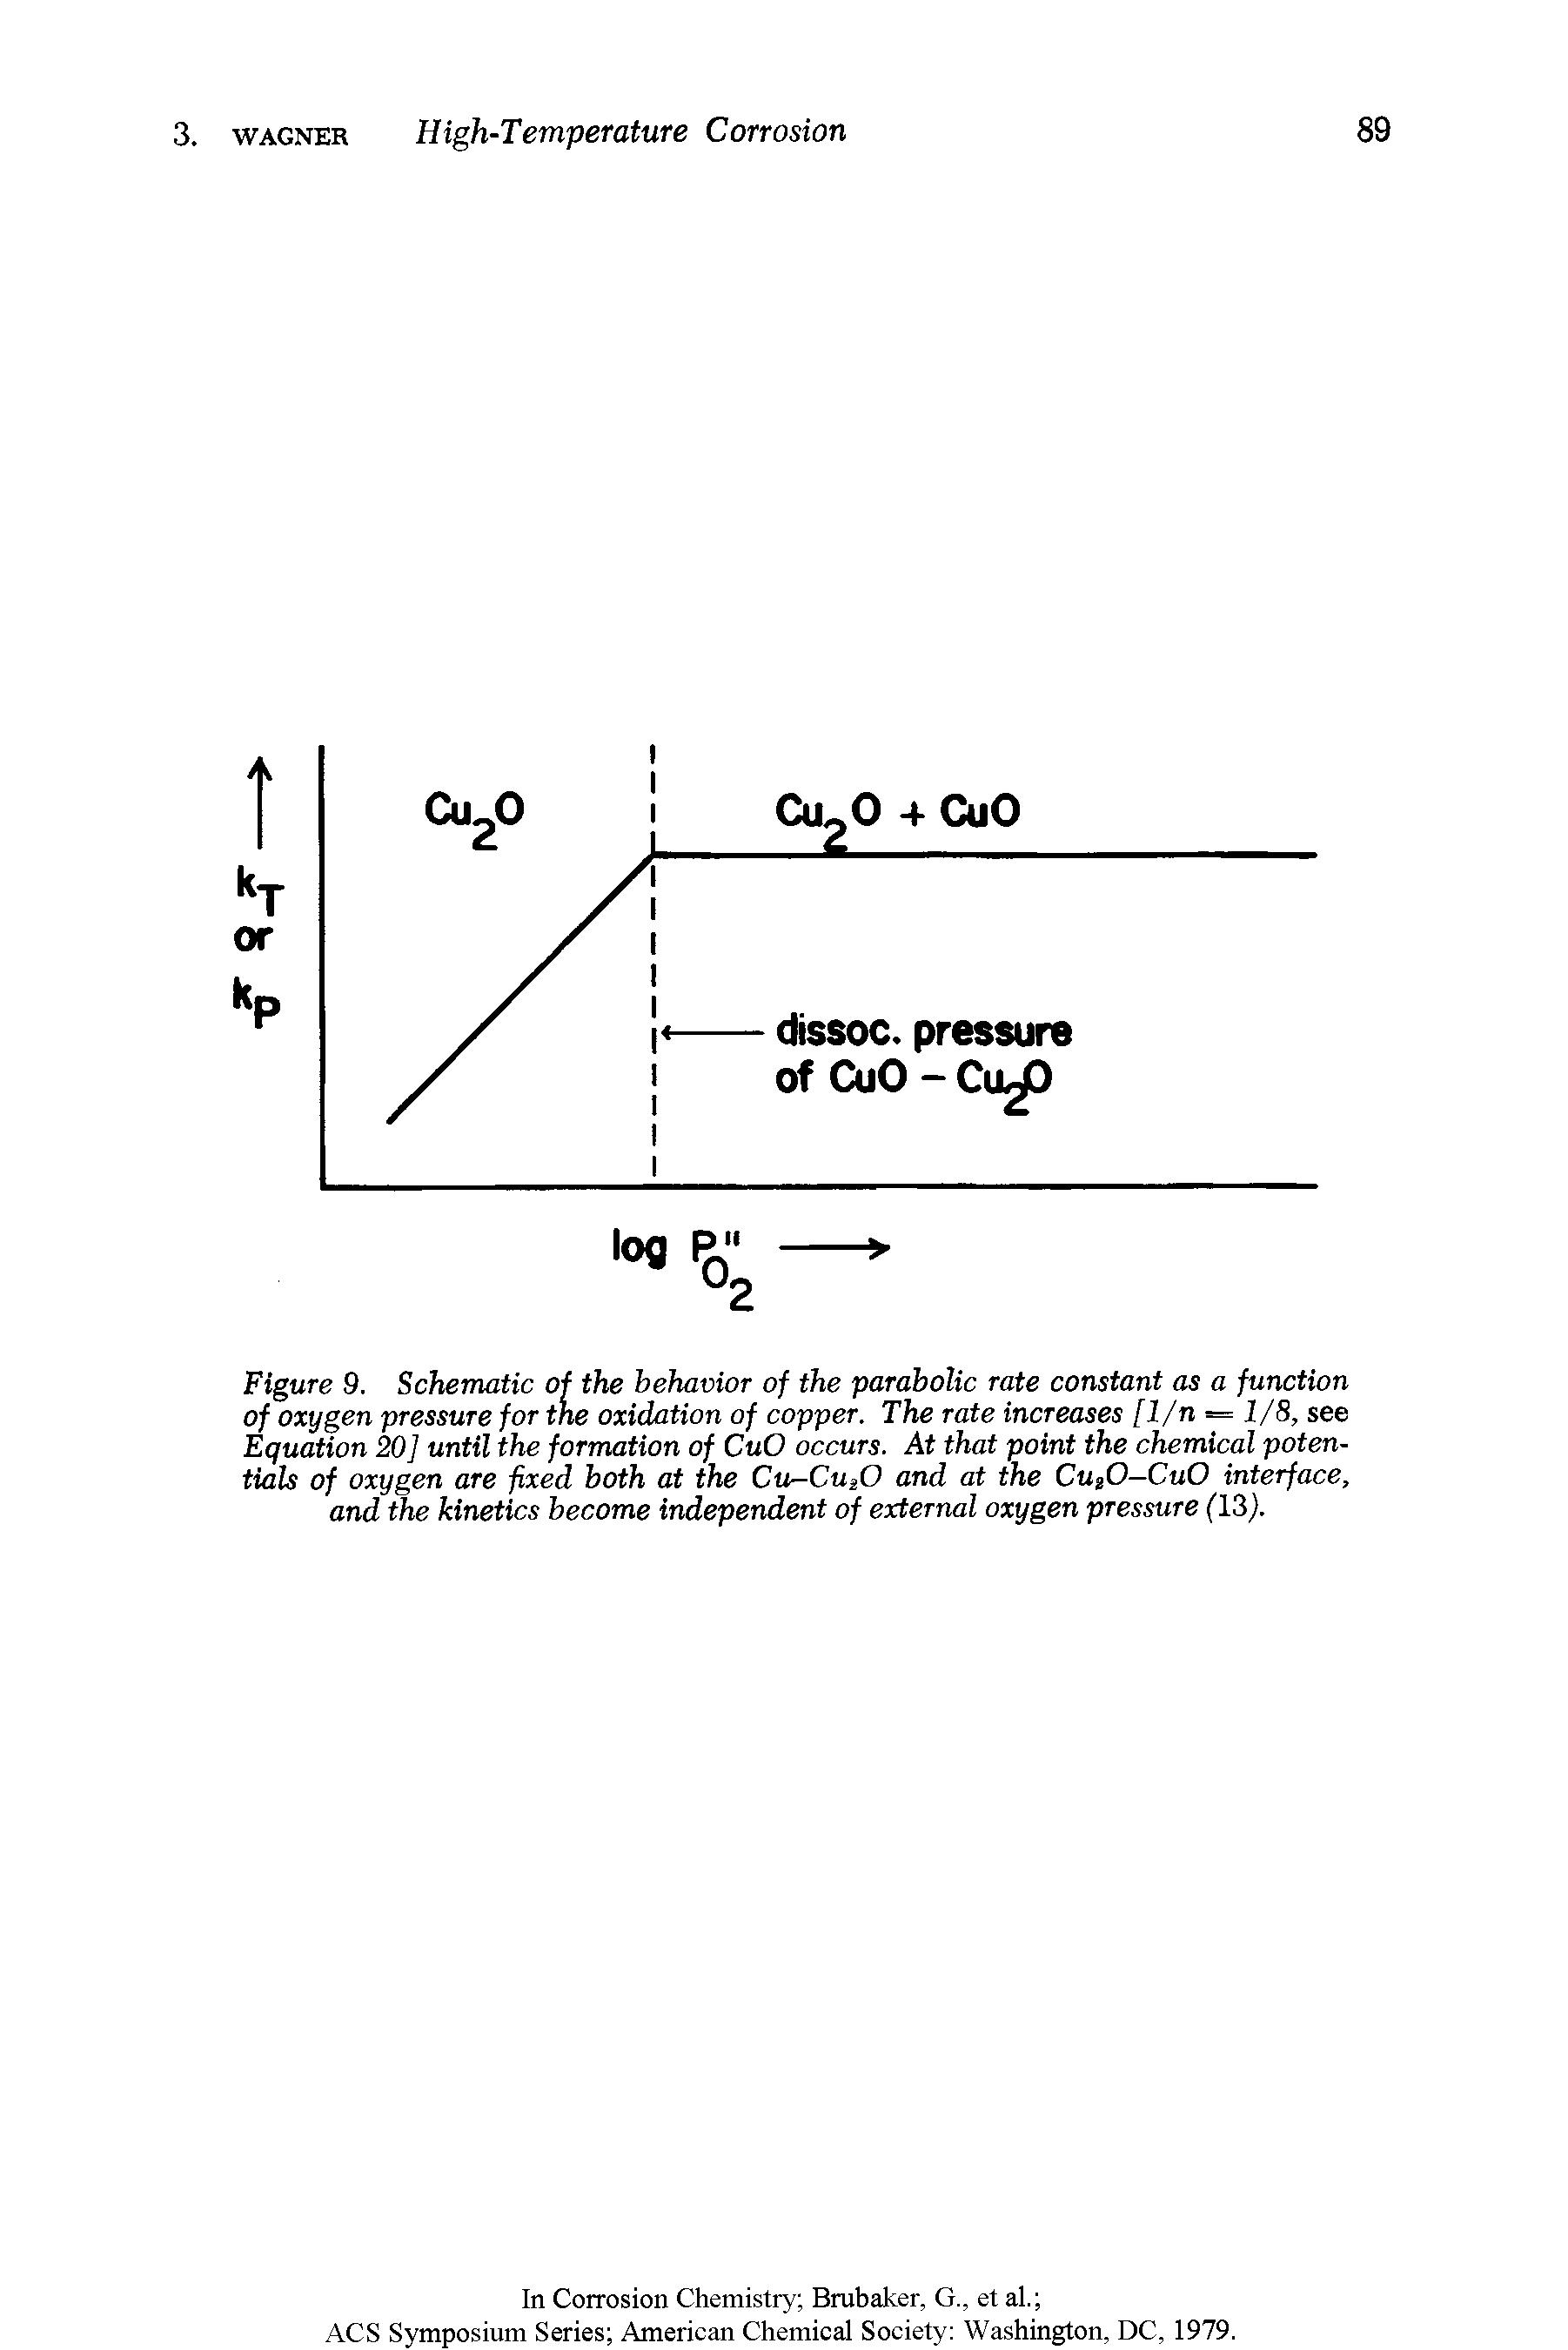 Figure 9. Schematic of the behavior of the parabolic rate constant as a function of oxygen pressure for the oxidation of copper. The rate increases /I/n = I/S, see Equation 20] until the formation of CuO occurs. At that point the chemical potentials of oxygen are fixed both at the Cu-Cu O and at the CugO—CuO interface, and the kinetics become independent of external oxygen pressure (13).